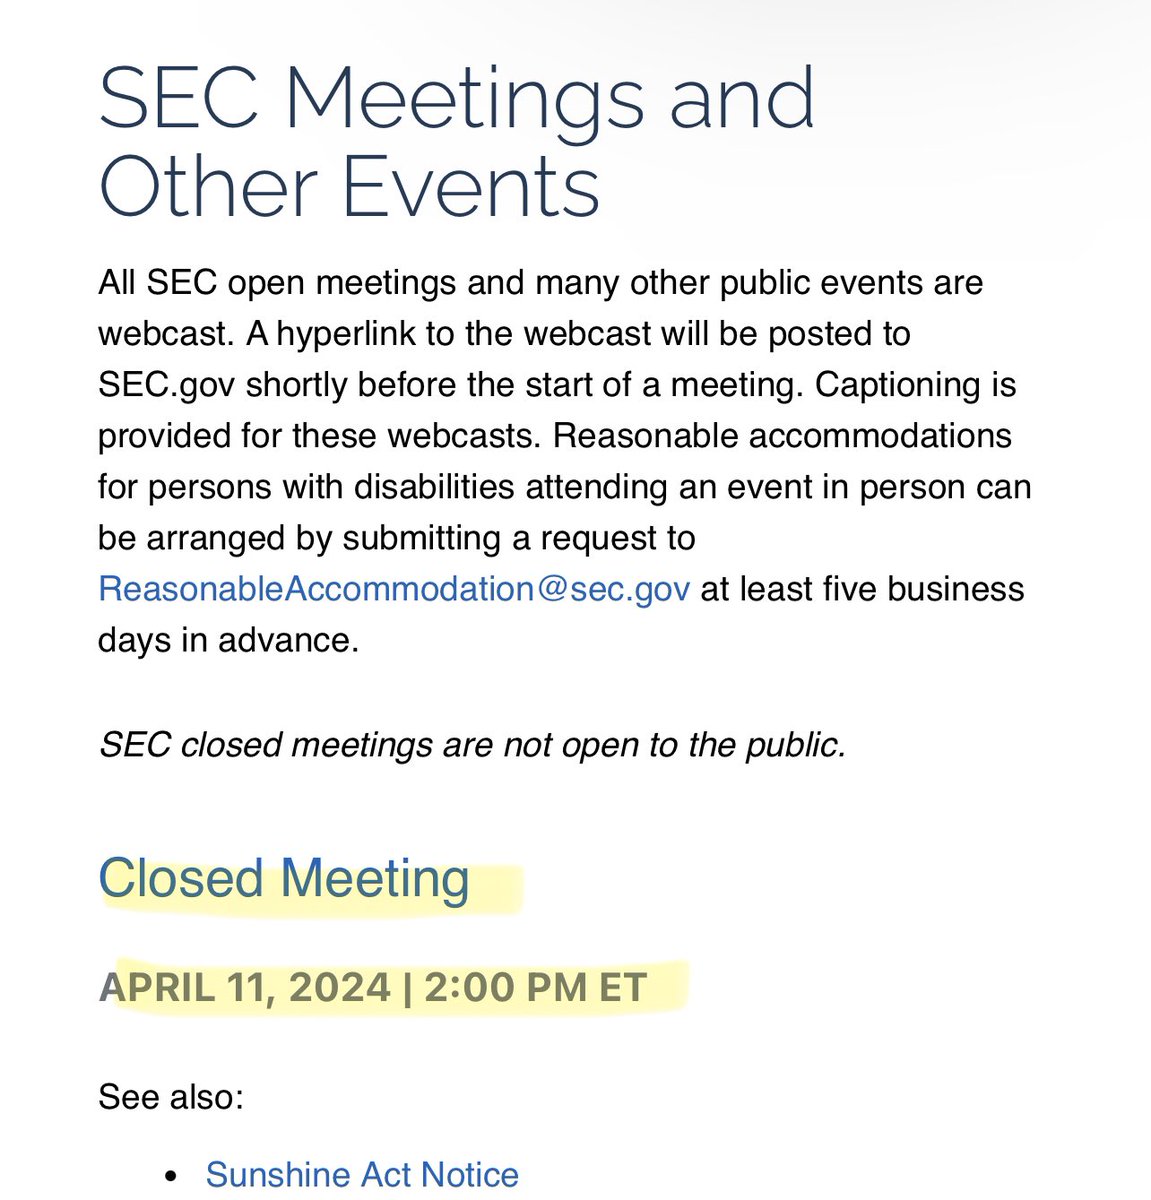 🚨BREAKING: The SEC 'closed meeting' is coming closer. 🚨RUMORS: SETTLEMENT! #XRP